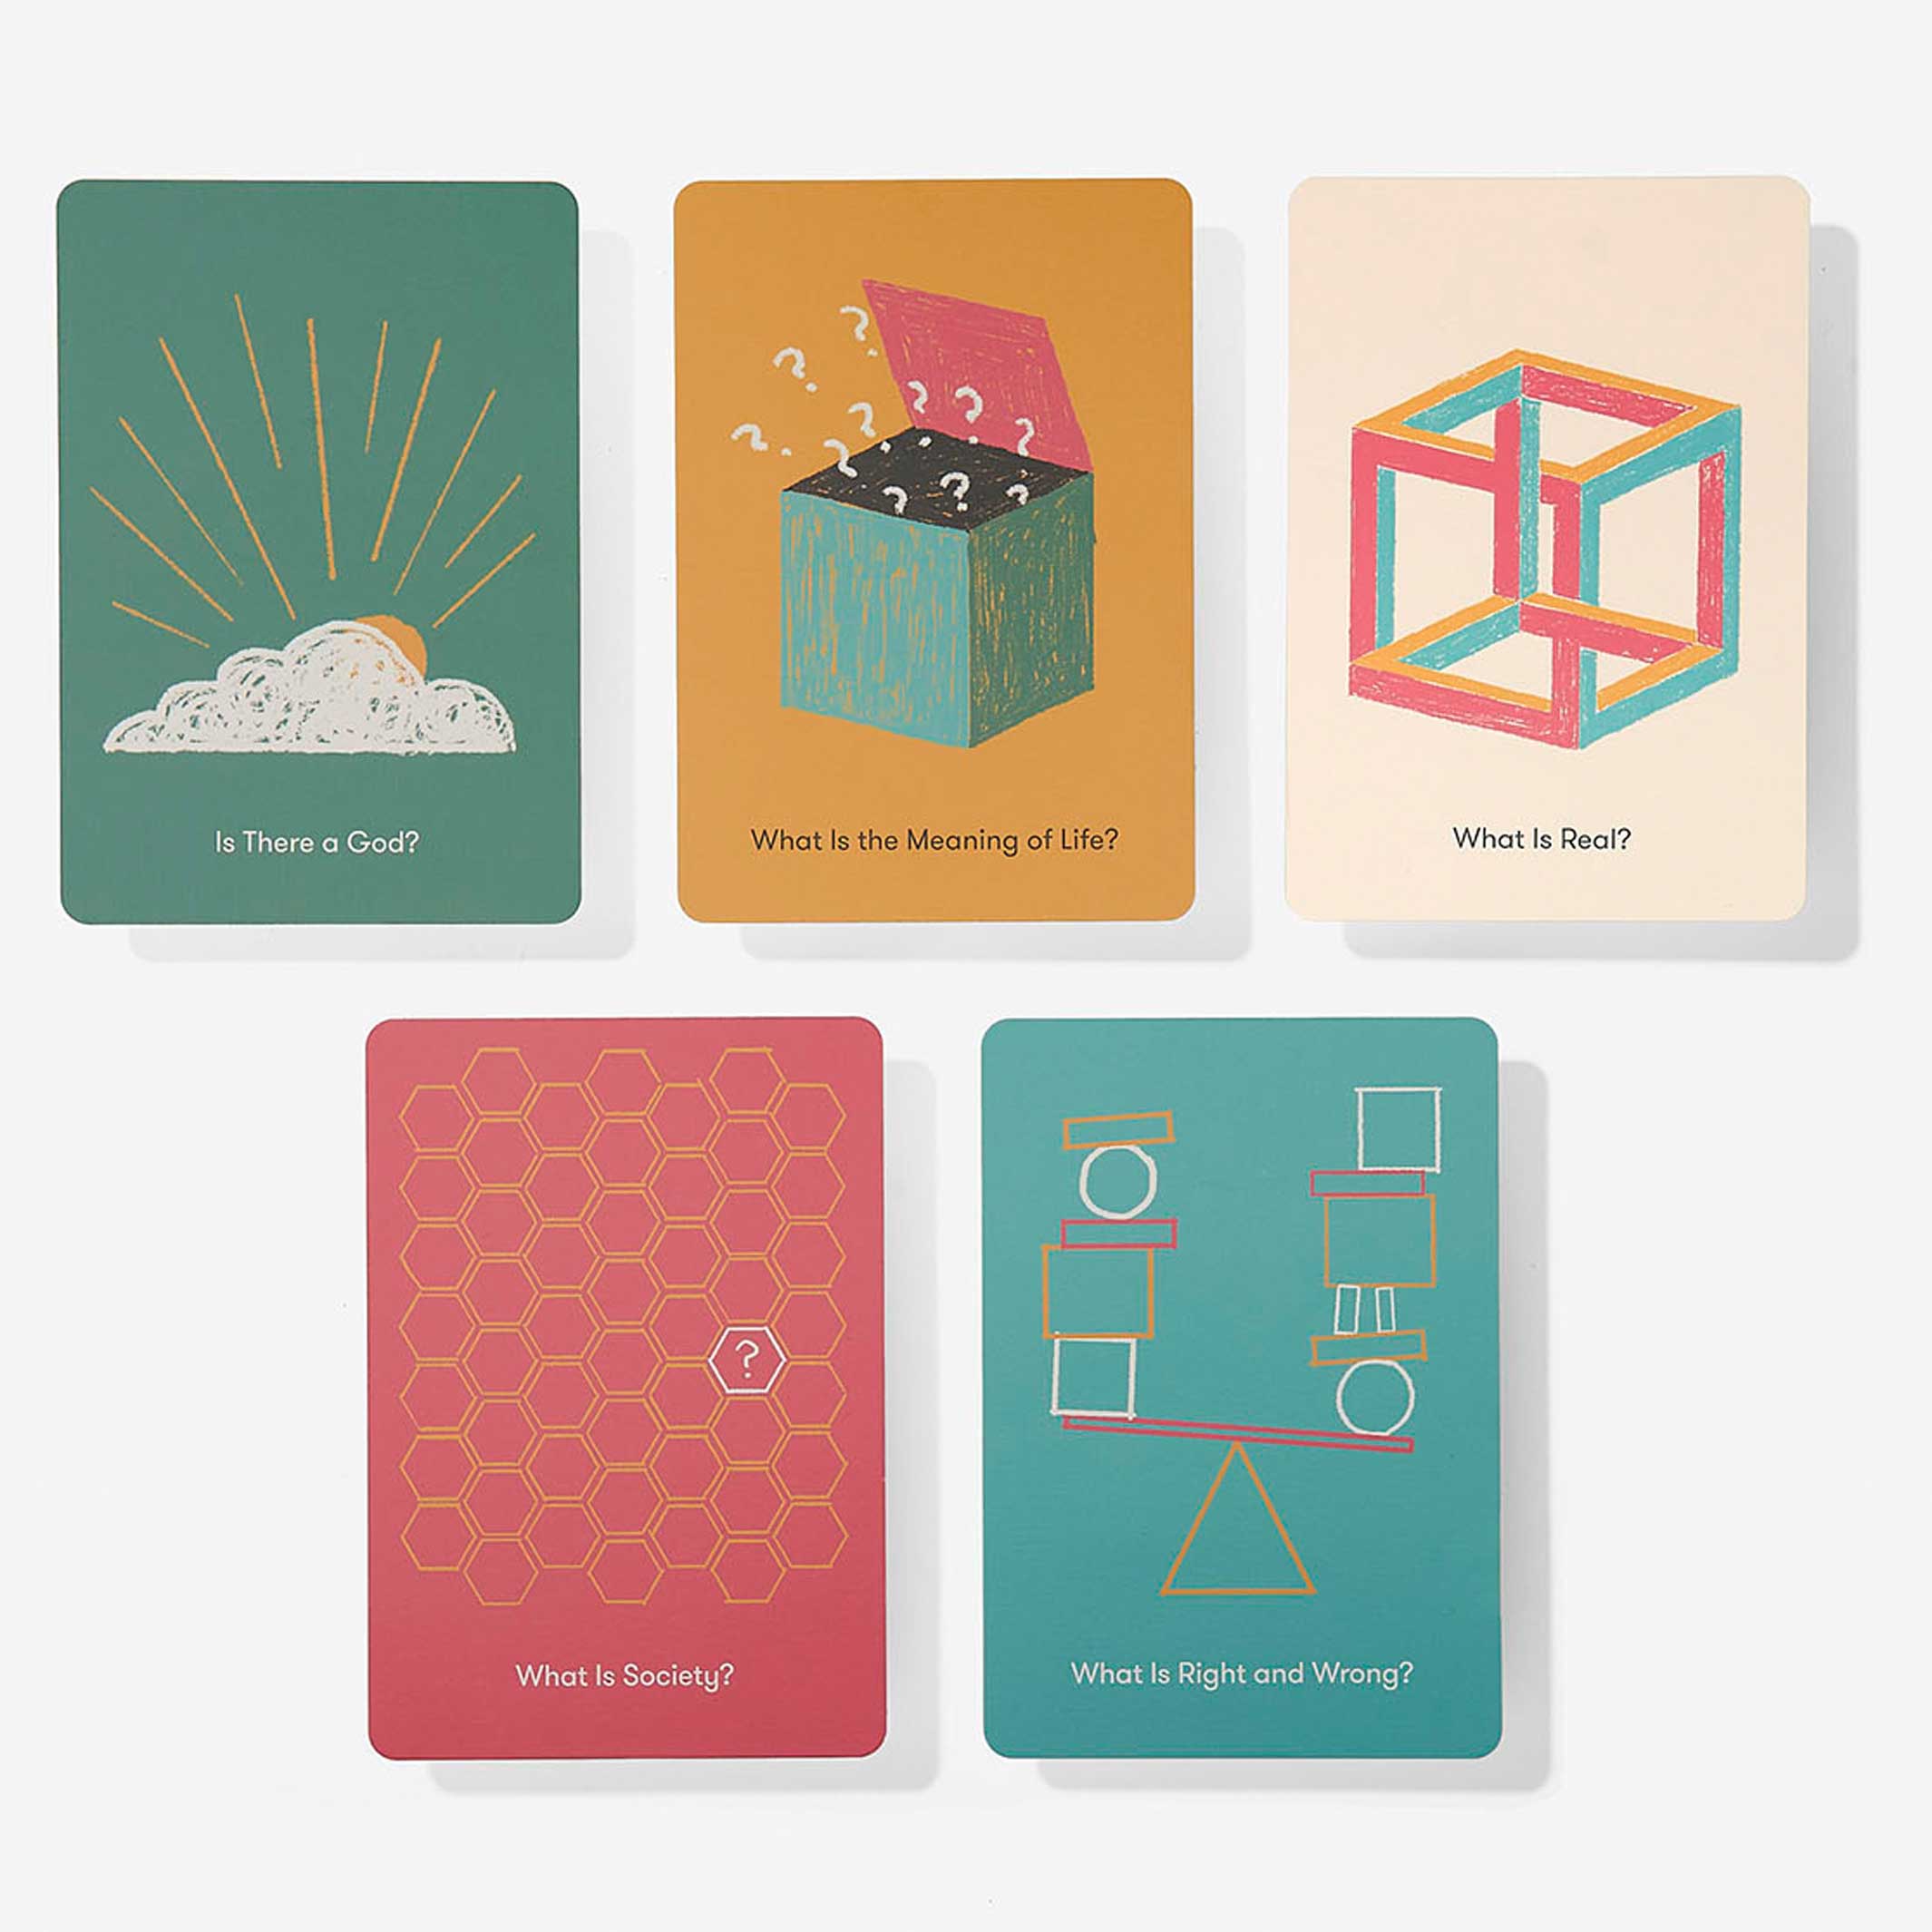 PHILOSOPHICAL QUESTIONS for CURIOUS MINDS | CARD GAME | English Edition | The School of Life